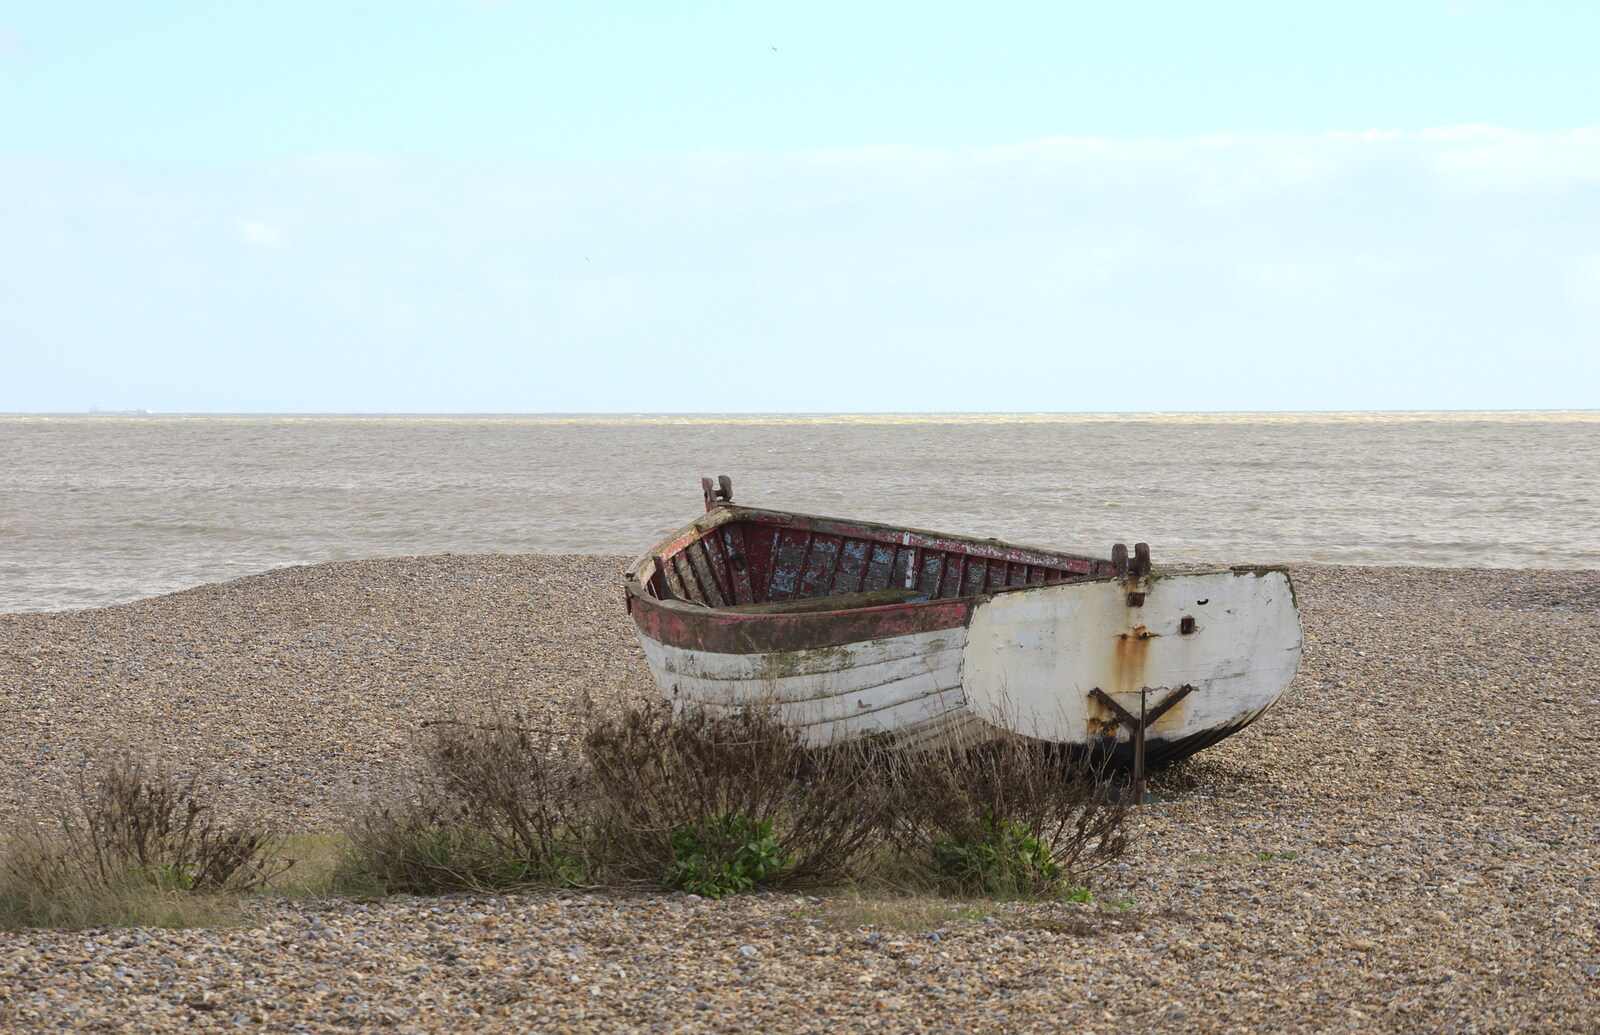 A lonely fishing boat from A Trip to Aldeburgh, Suffolk - 7th February 2016